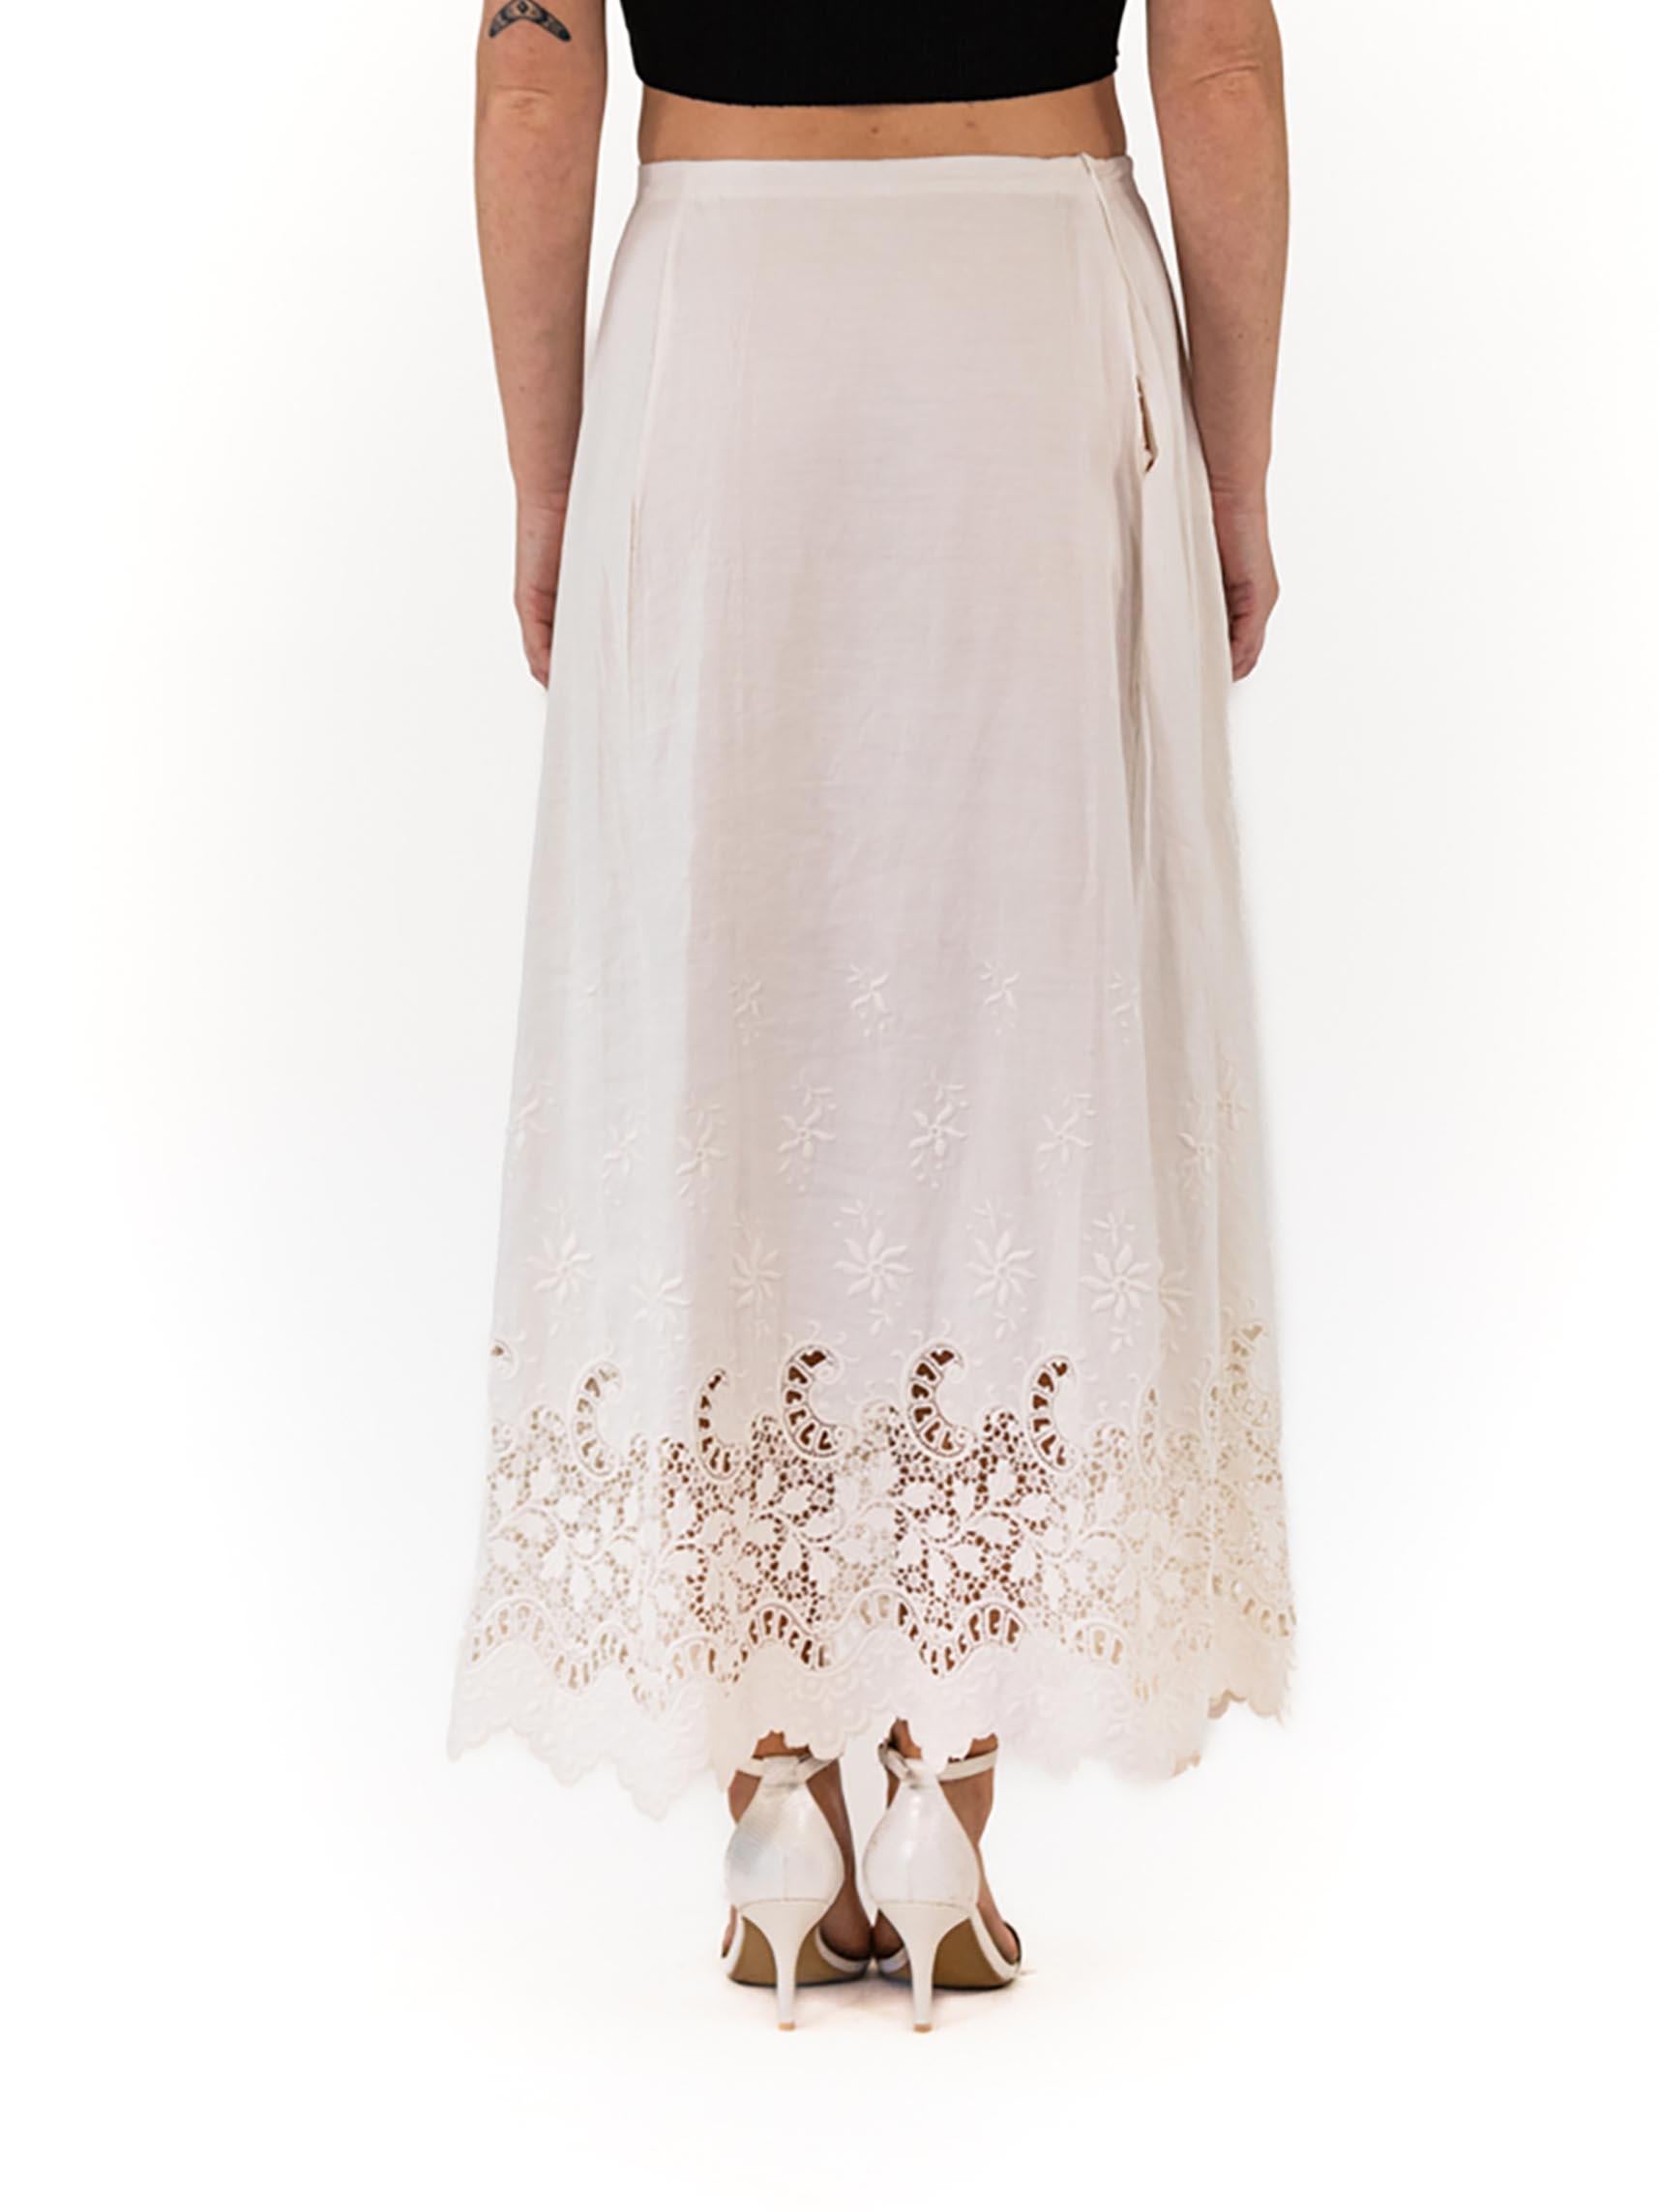 Edwardian White Linen Skirt With Floral Hand Embroidery 4